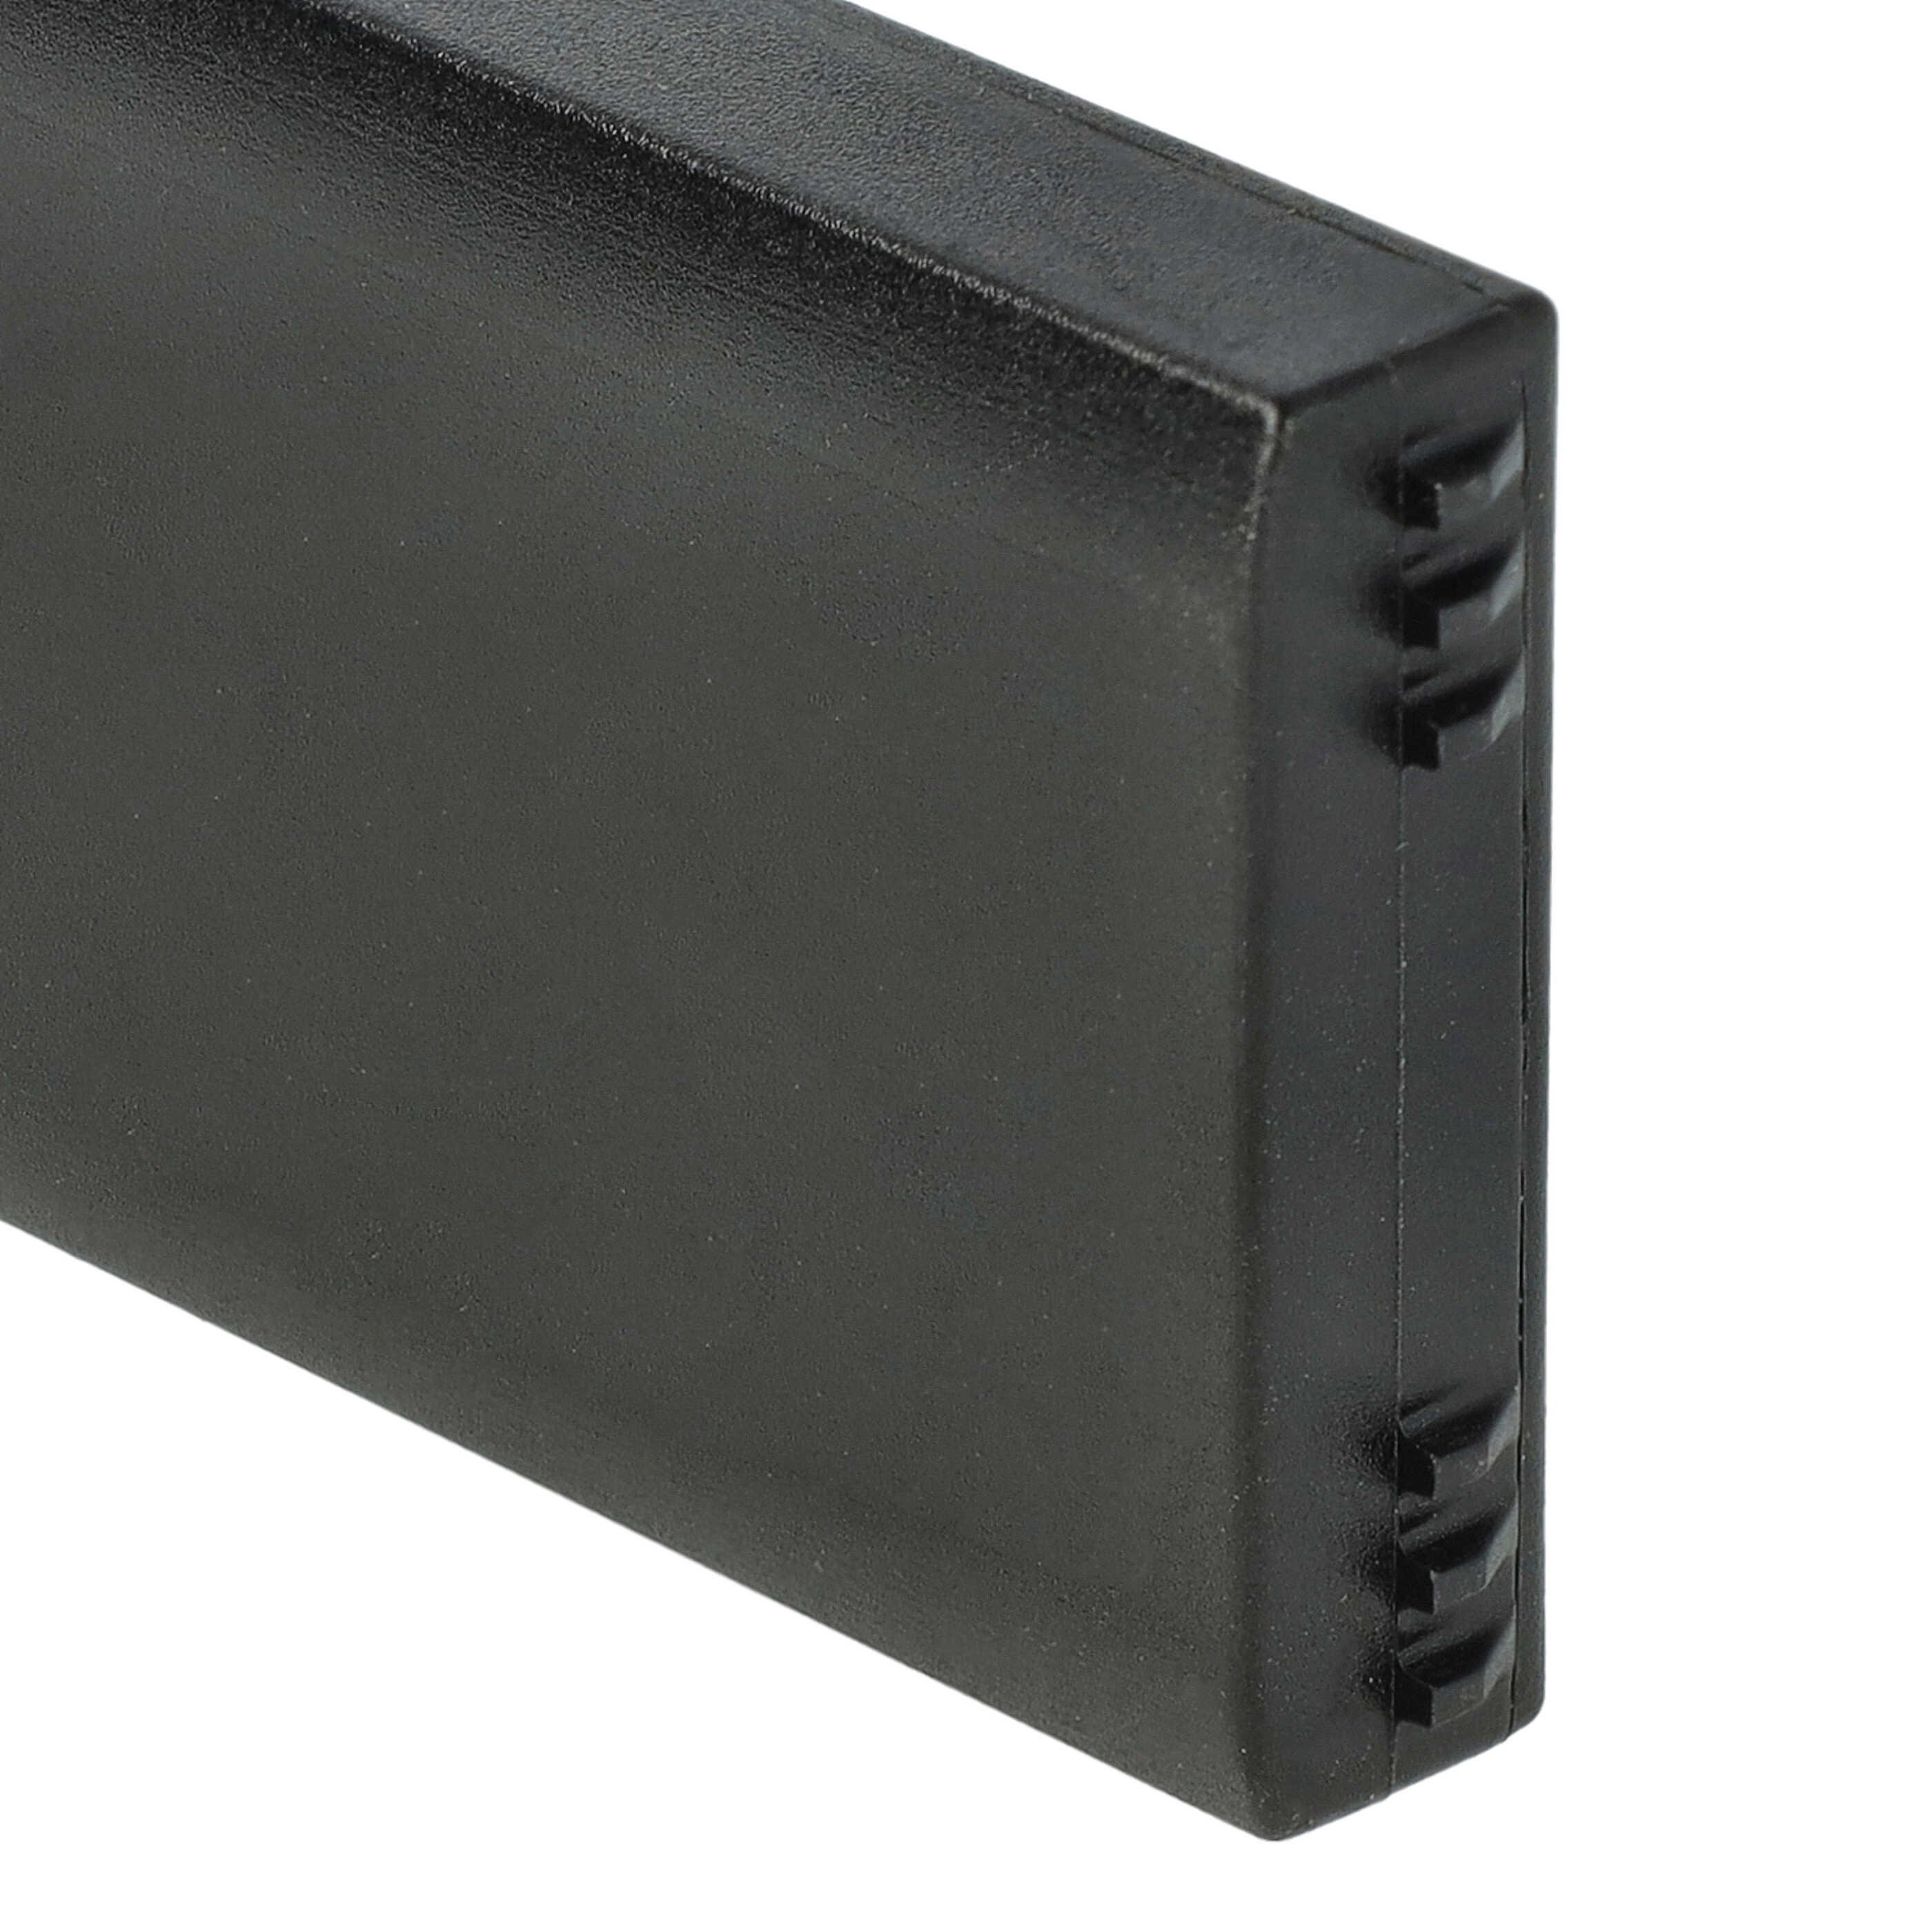 Industrial Remote Control Battery Replacement for Danfoss BT11K - 1100mAh 3.7V Li-Ion